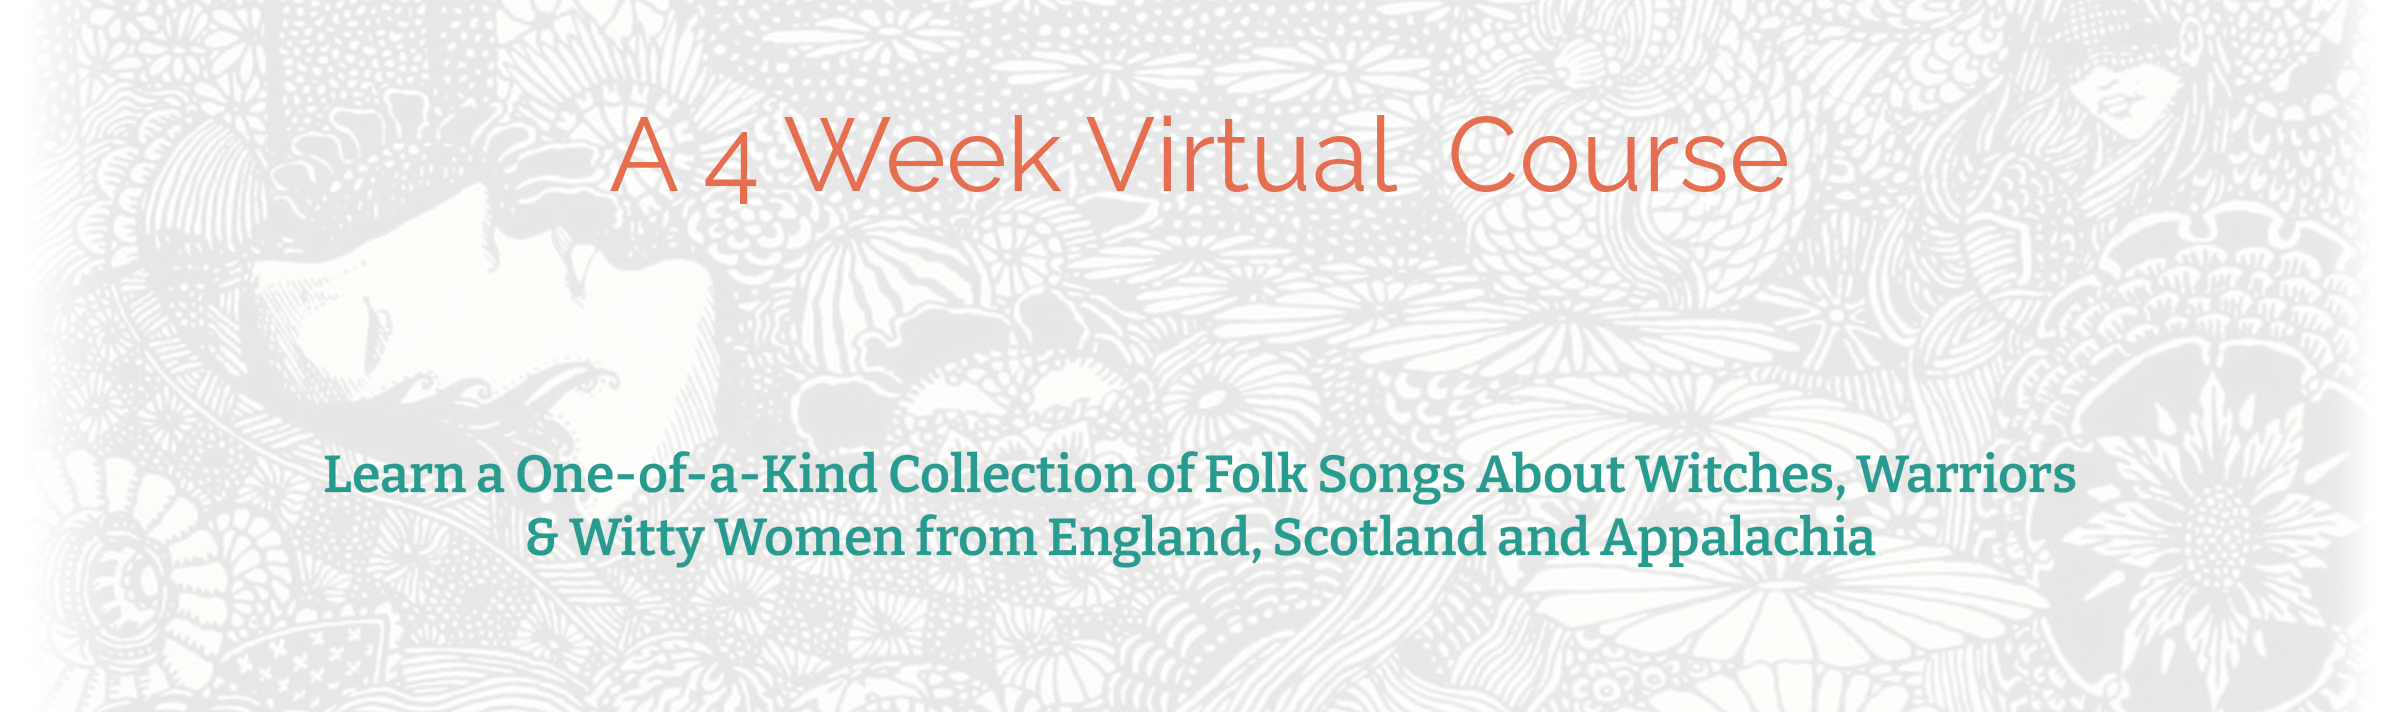 Text in this image reads:
"A 4 Week Virtual Course" followed by "Learn a One-of-a-Kind Collection of Folk Songs About Witches, Warriors, & Witty Women from England, Scotland and Appalachia." 

The background image is black and white and washed out. Visible is an androgynous figure who appears to be laying down, face up, with swirling patterns consisting of flowers and other organic shapes surrounding them. 

Illustration by Harry Clarke, 1933. 